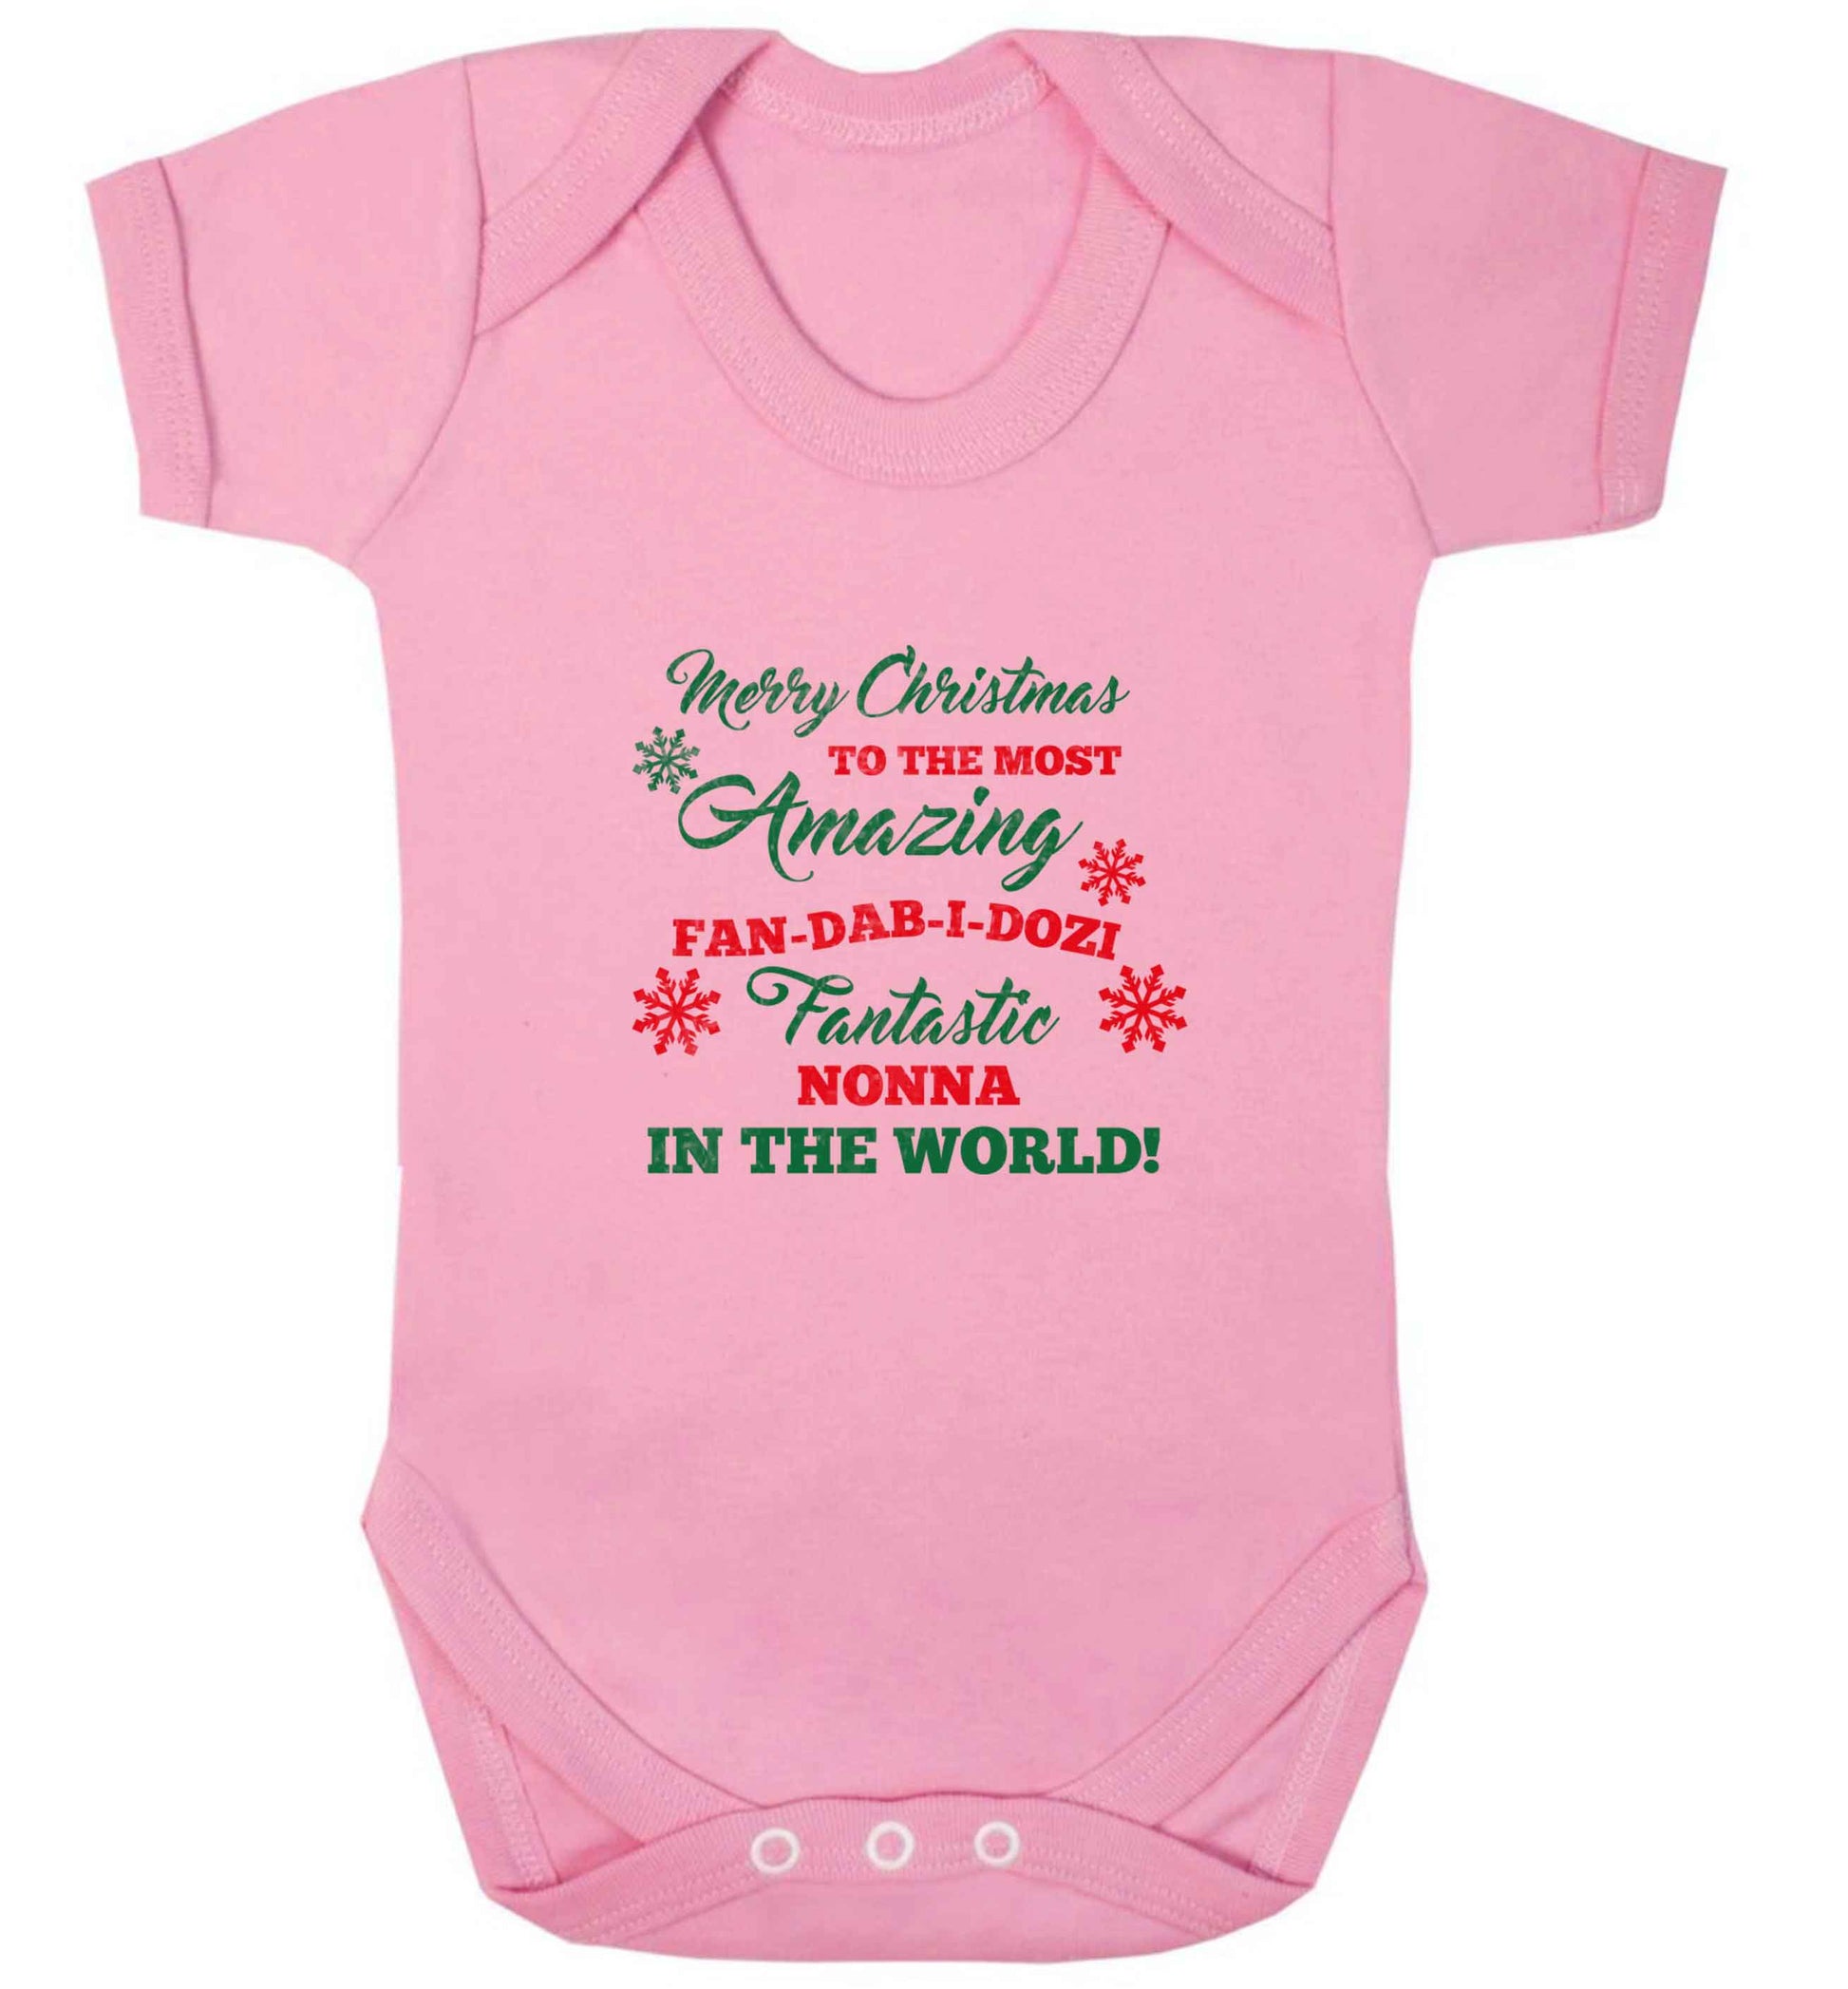 Merry Christmas to the most amazing fan-dab-i-dozi fantasic Nonna in the world baby vest pale pink 18-24 months